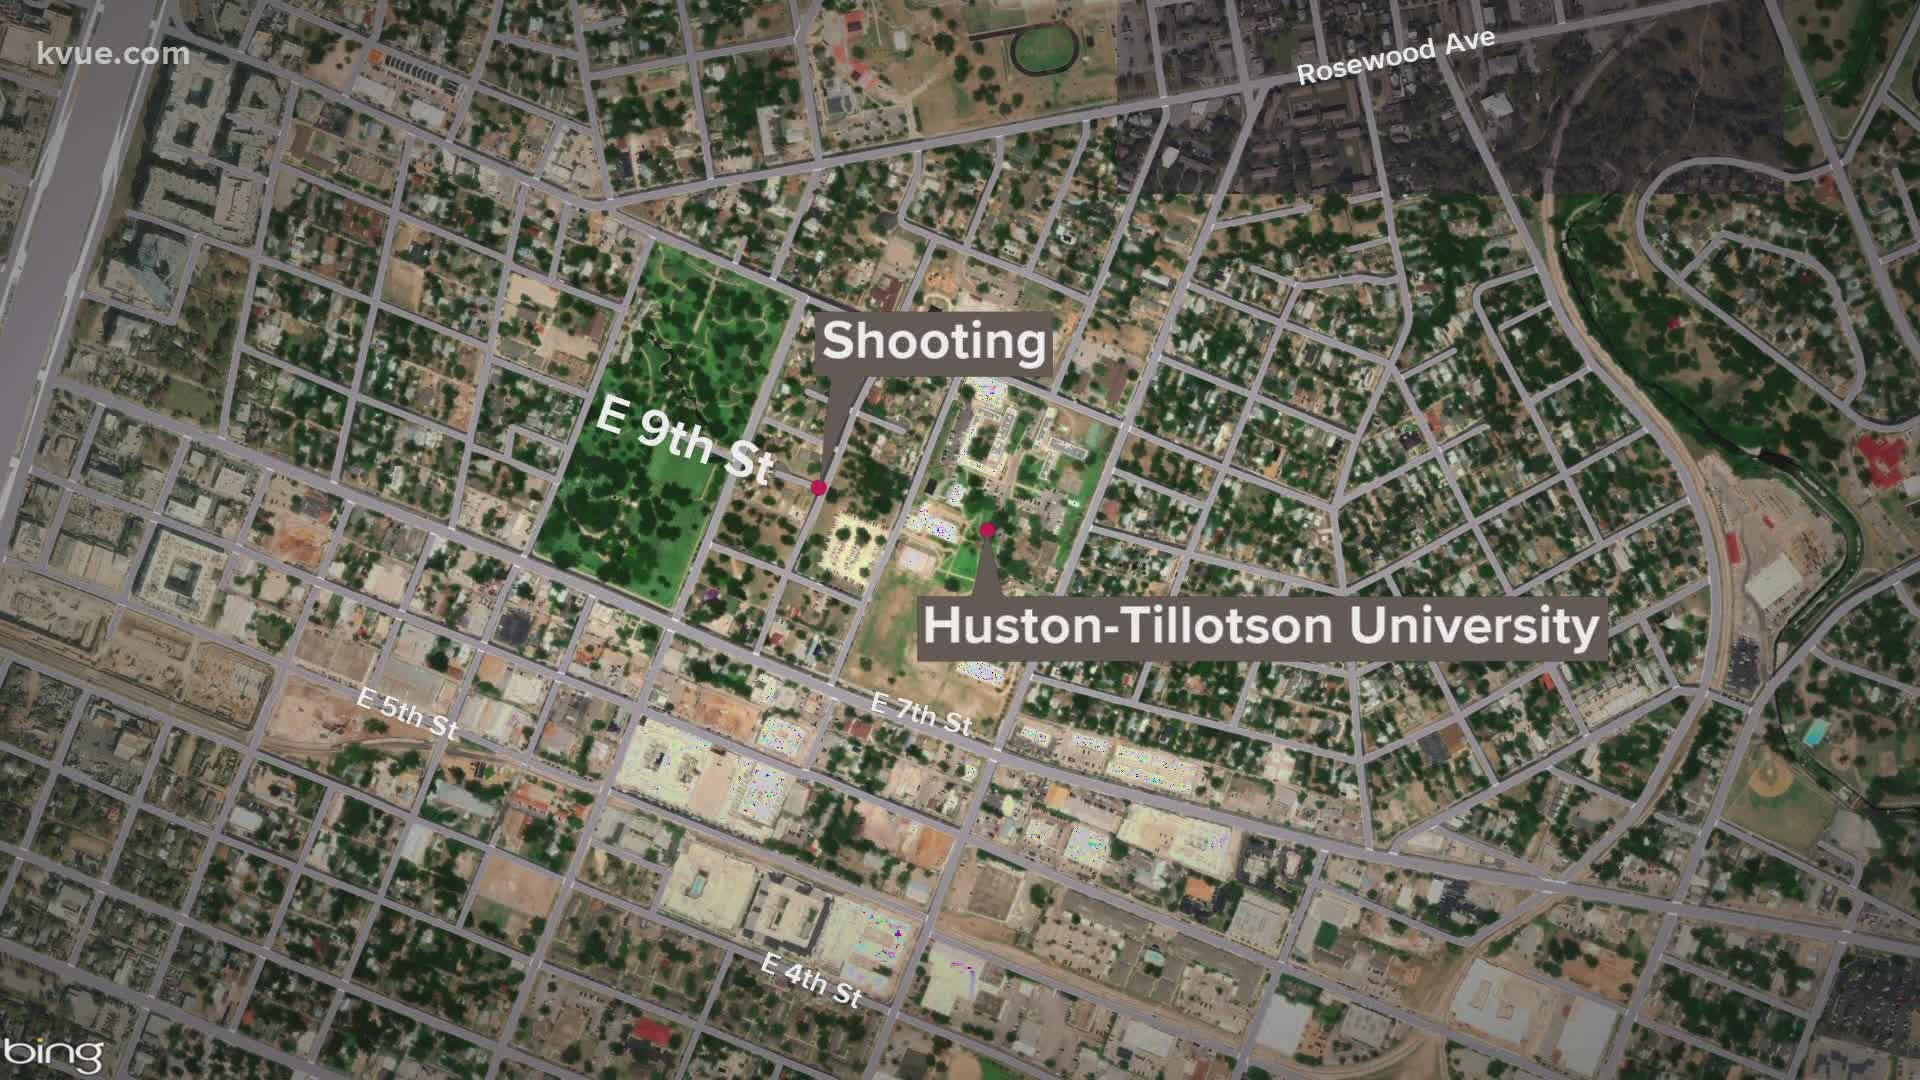 The shooting occurred near Huston-Tillotson University just before midnight on Fourth of July.